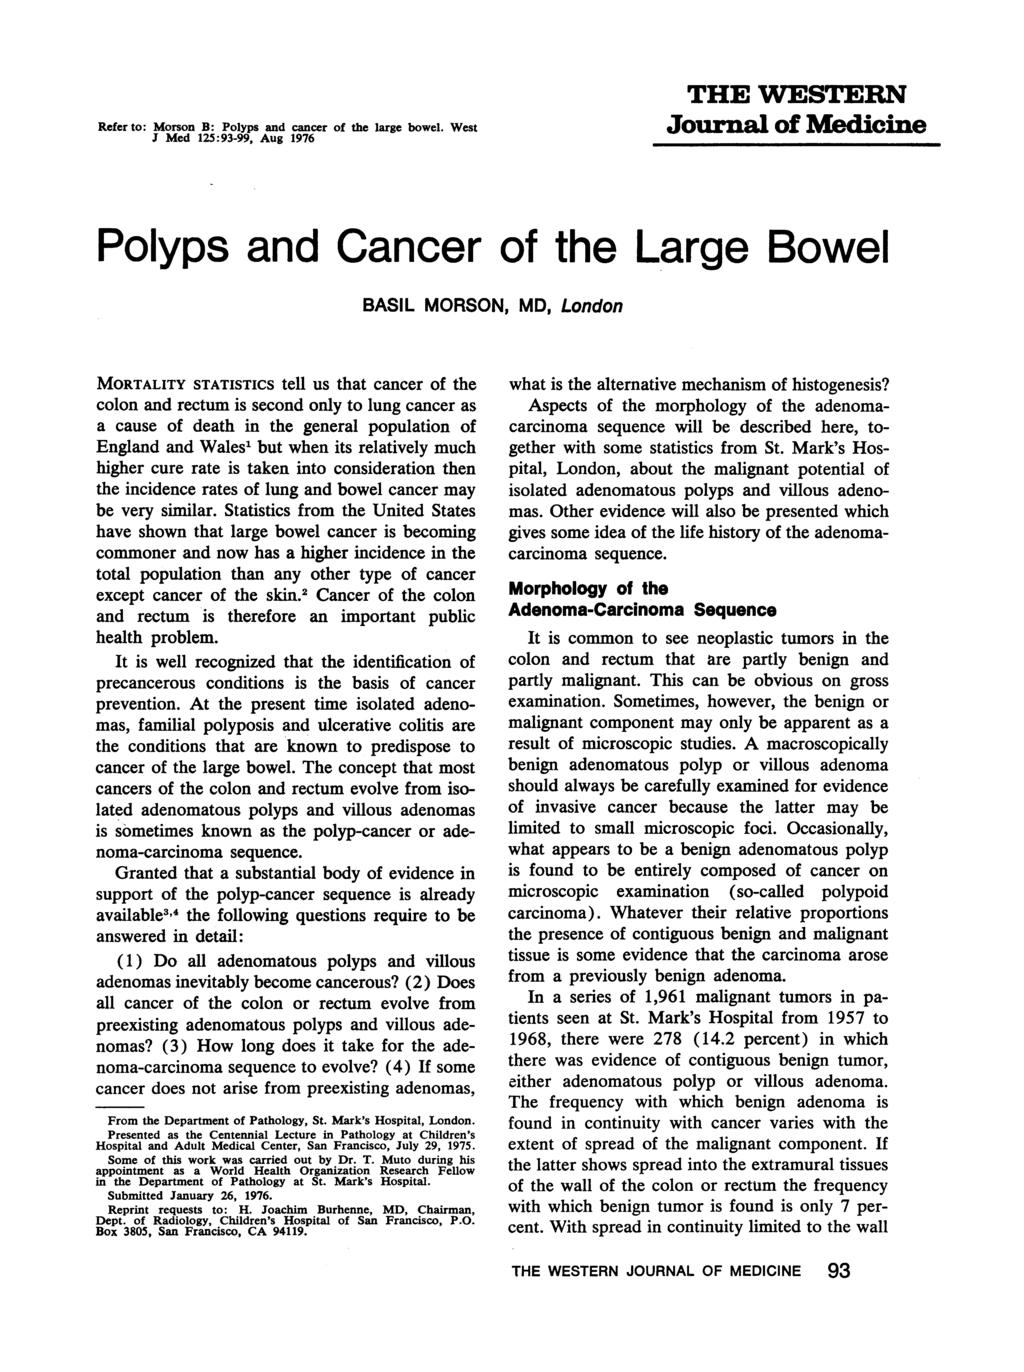 Refer to: Morson B: Polyps and cancer of the large bowel.